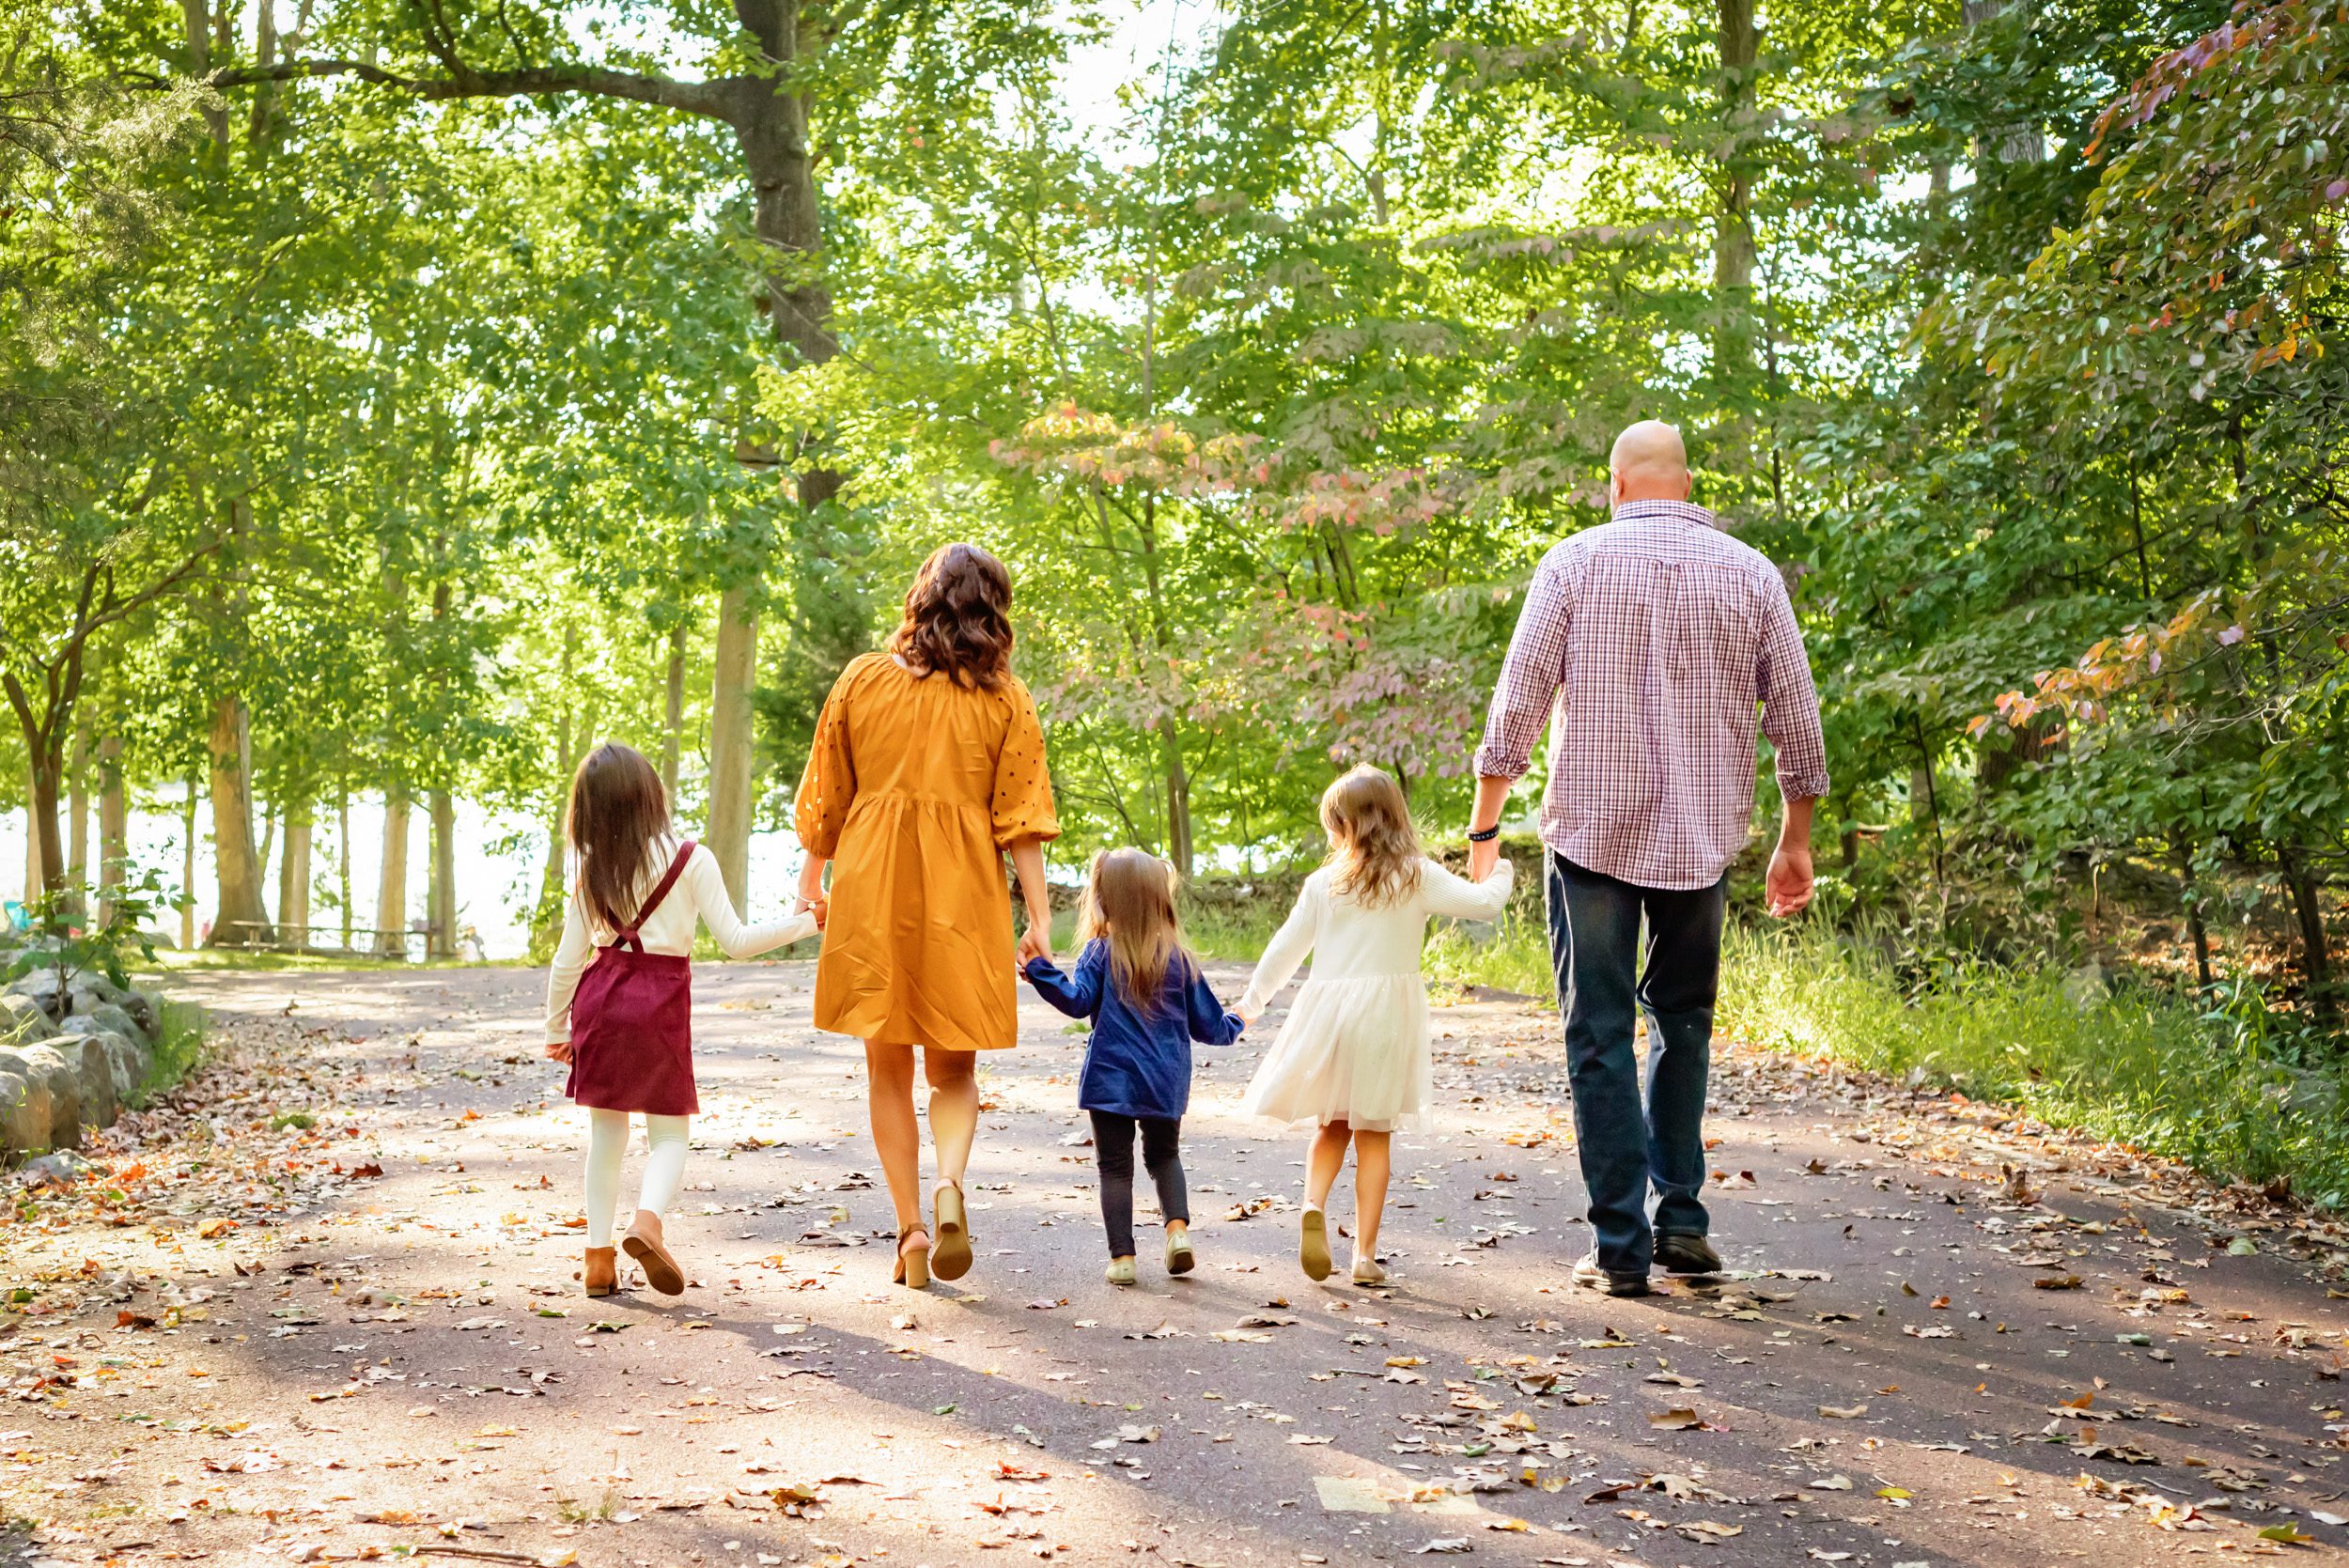 Grandparents holding hands with their three granddaughters and walking away from the camera as the sun shines through the trees during an extended family photo session